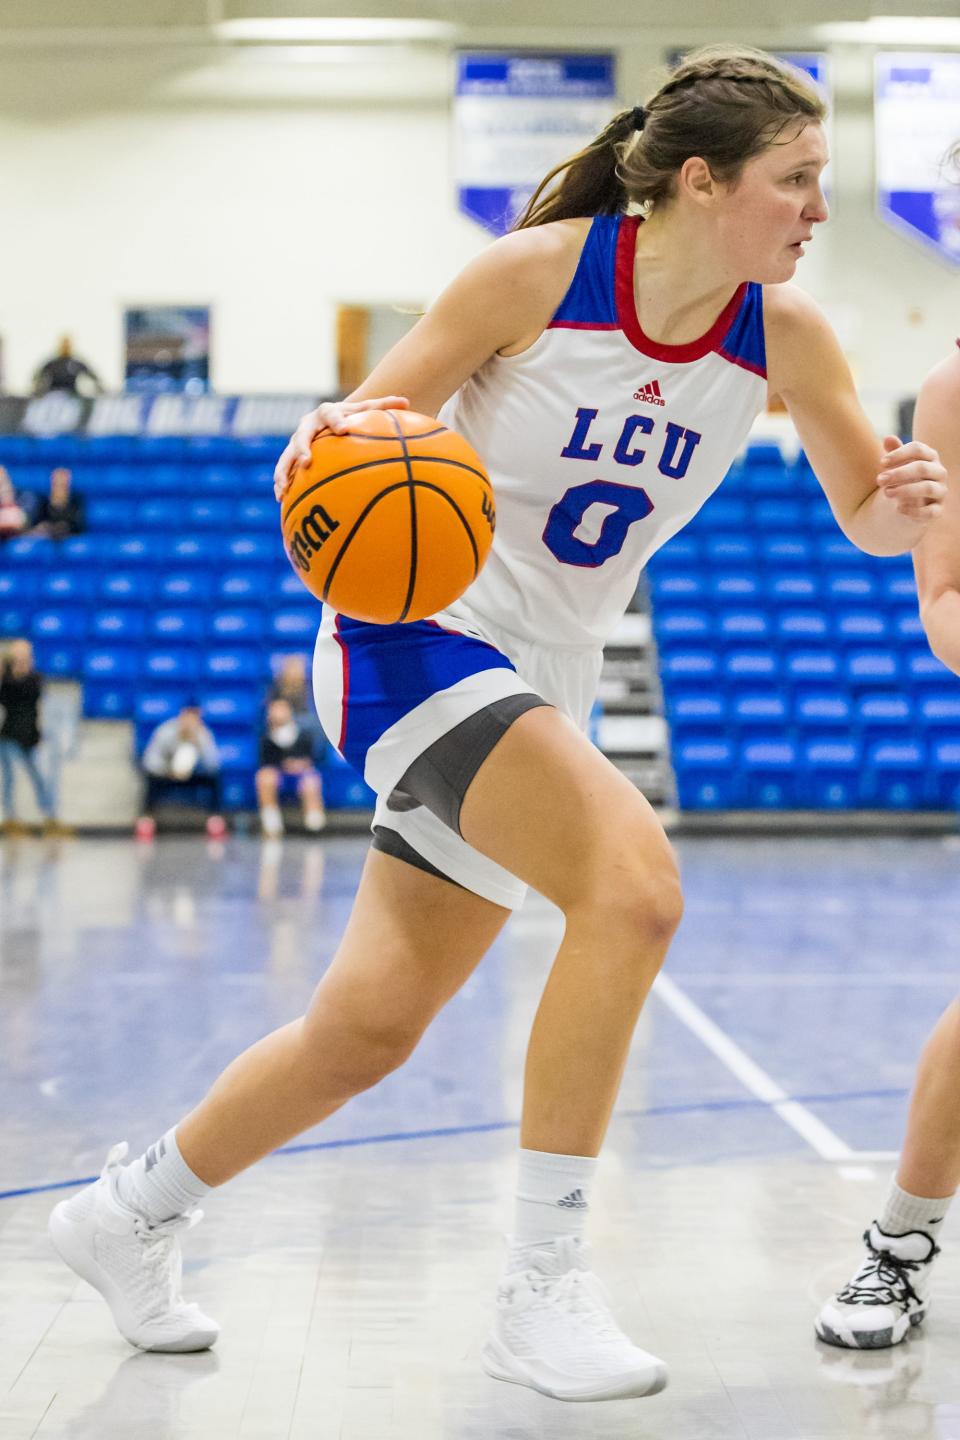 Lubbock Christian University forward Grace Foster (0) was named the Lone Star Conference offensive player of the week after she averaged 17.5 points in two Lady Chaps' road victories last week.